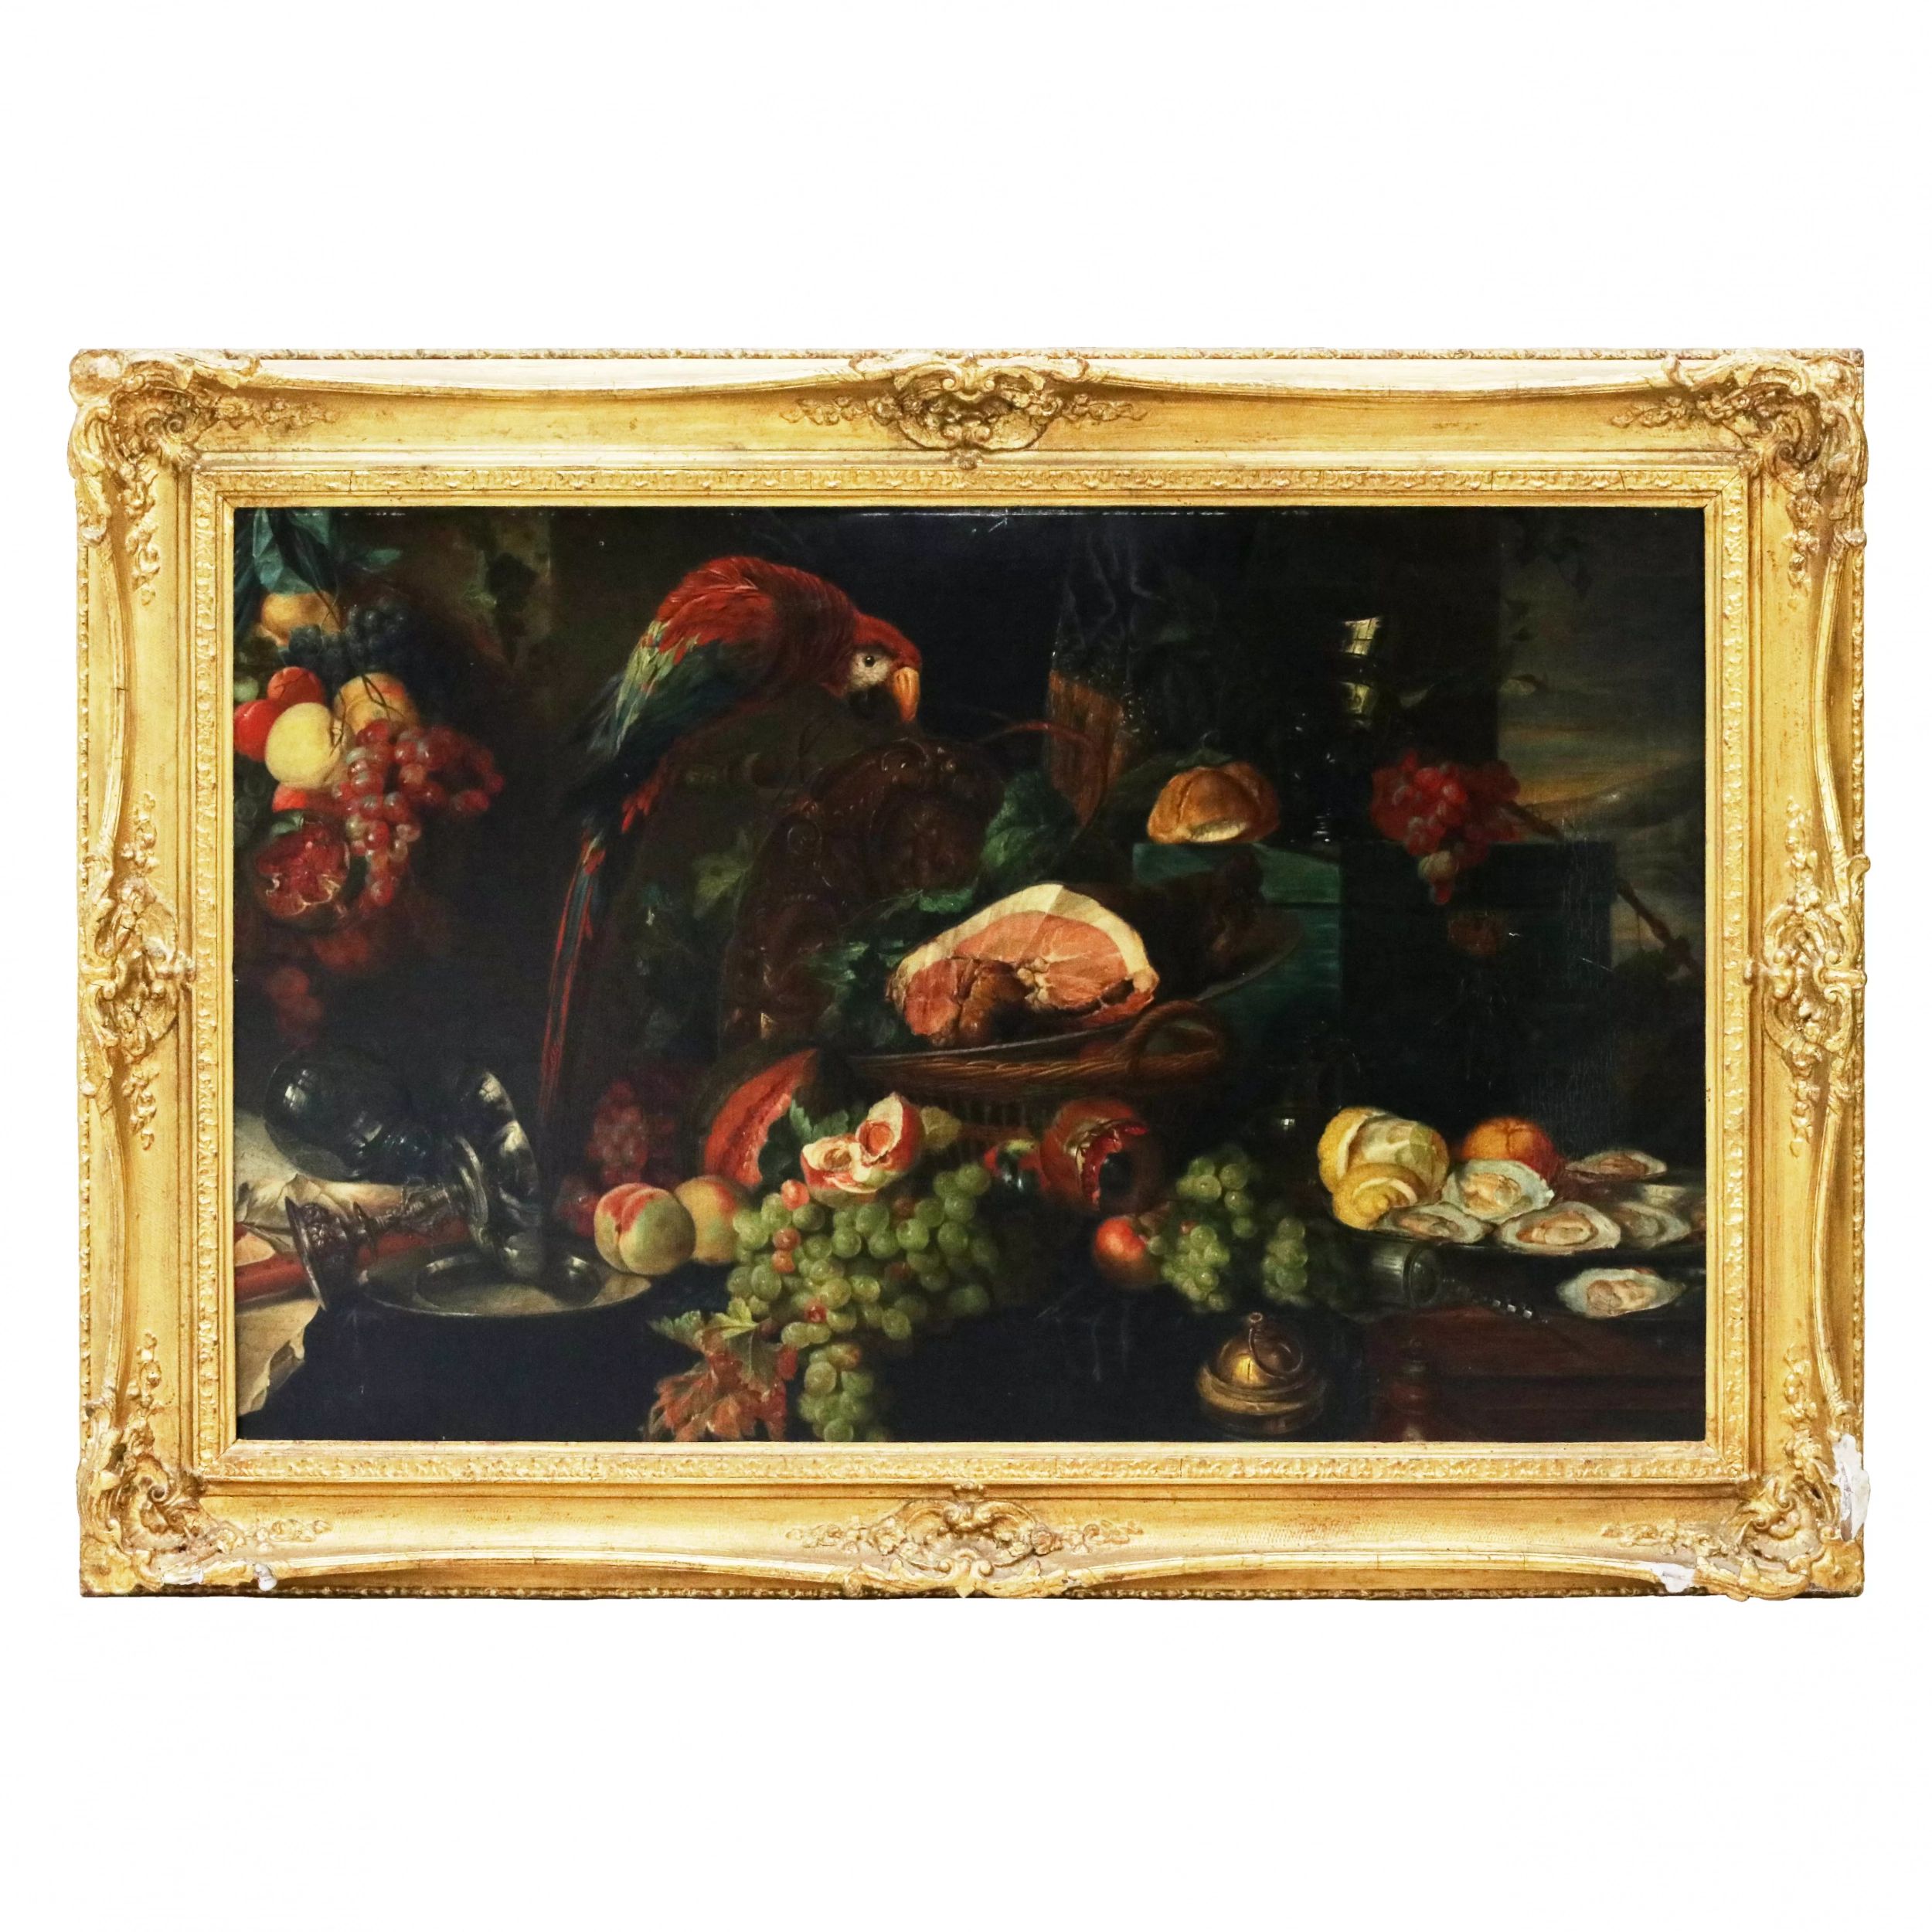 Majestic-still-life-with-gifts-of-nature-and-a-parrot-19th-century-After--Jan-David-De-Heem-